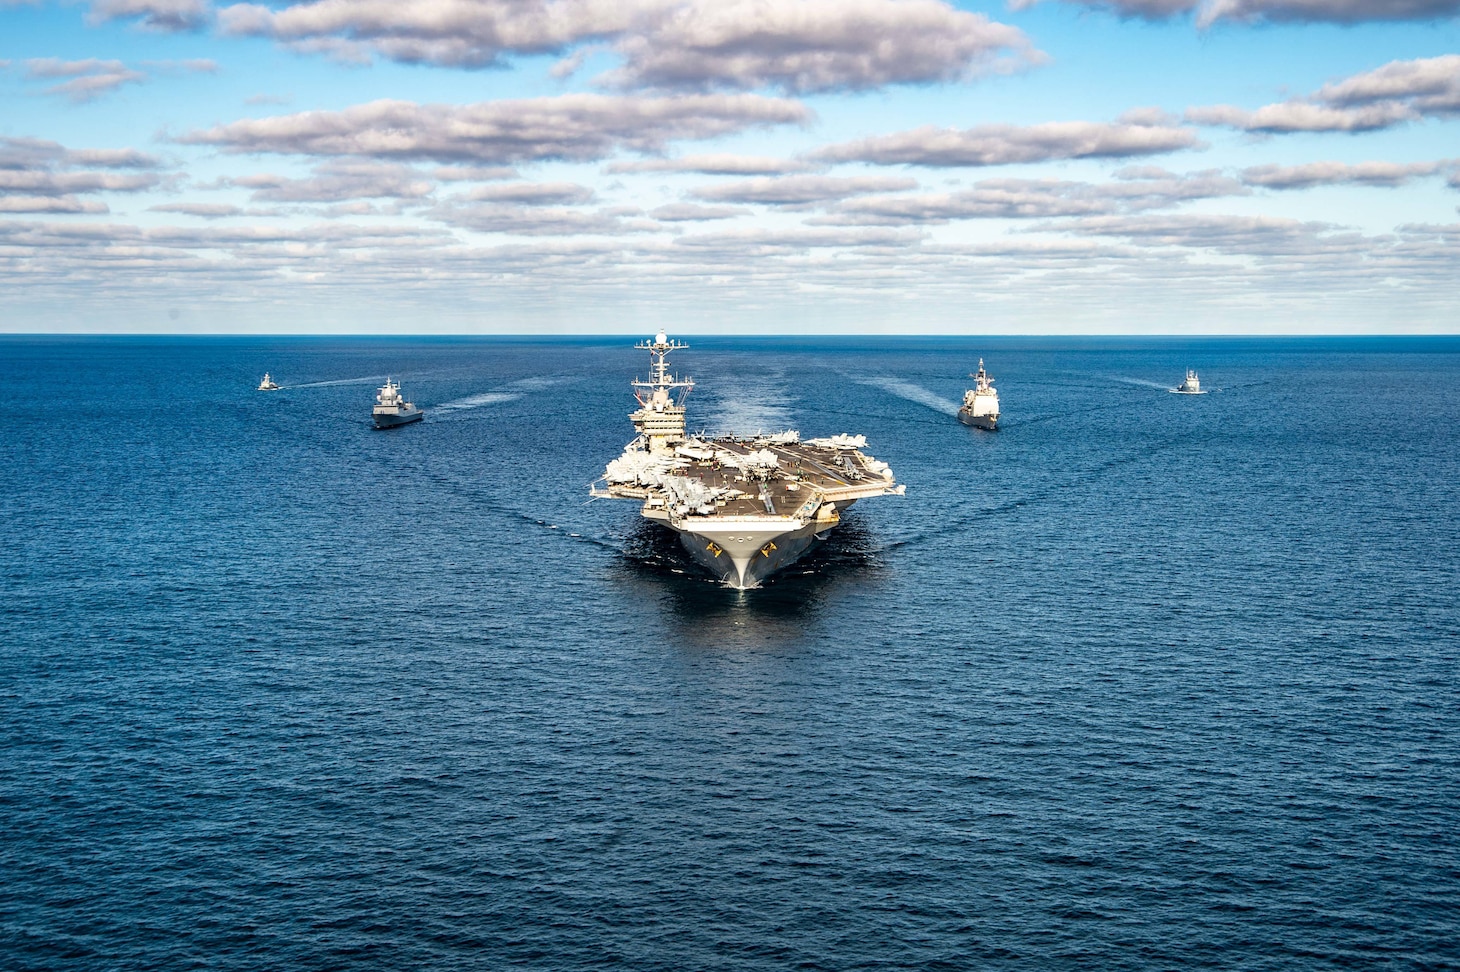 The Nimitz-class aircraft carrier USS Harry S. Truman (CVN 75), the Ticonderoga-class guided missile cruiser USS San Jacinto (CG 56), and the Royal Norwegian Navy Frigate HNoMS Fridtjof Nansen (F310) participate in a passing exercise with the Tunisian offshore patrol vessel Hannon (P612) and La Combatante III class fast patrol boat Tunis (502) in the Mediterranean Sea, Dec. 20, 2021.